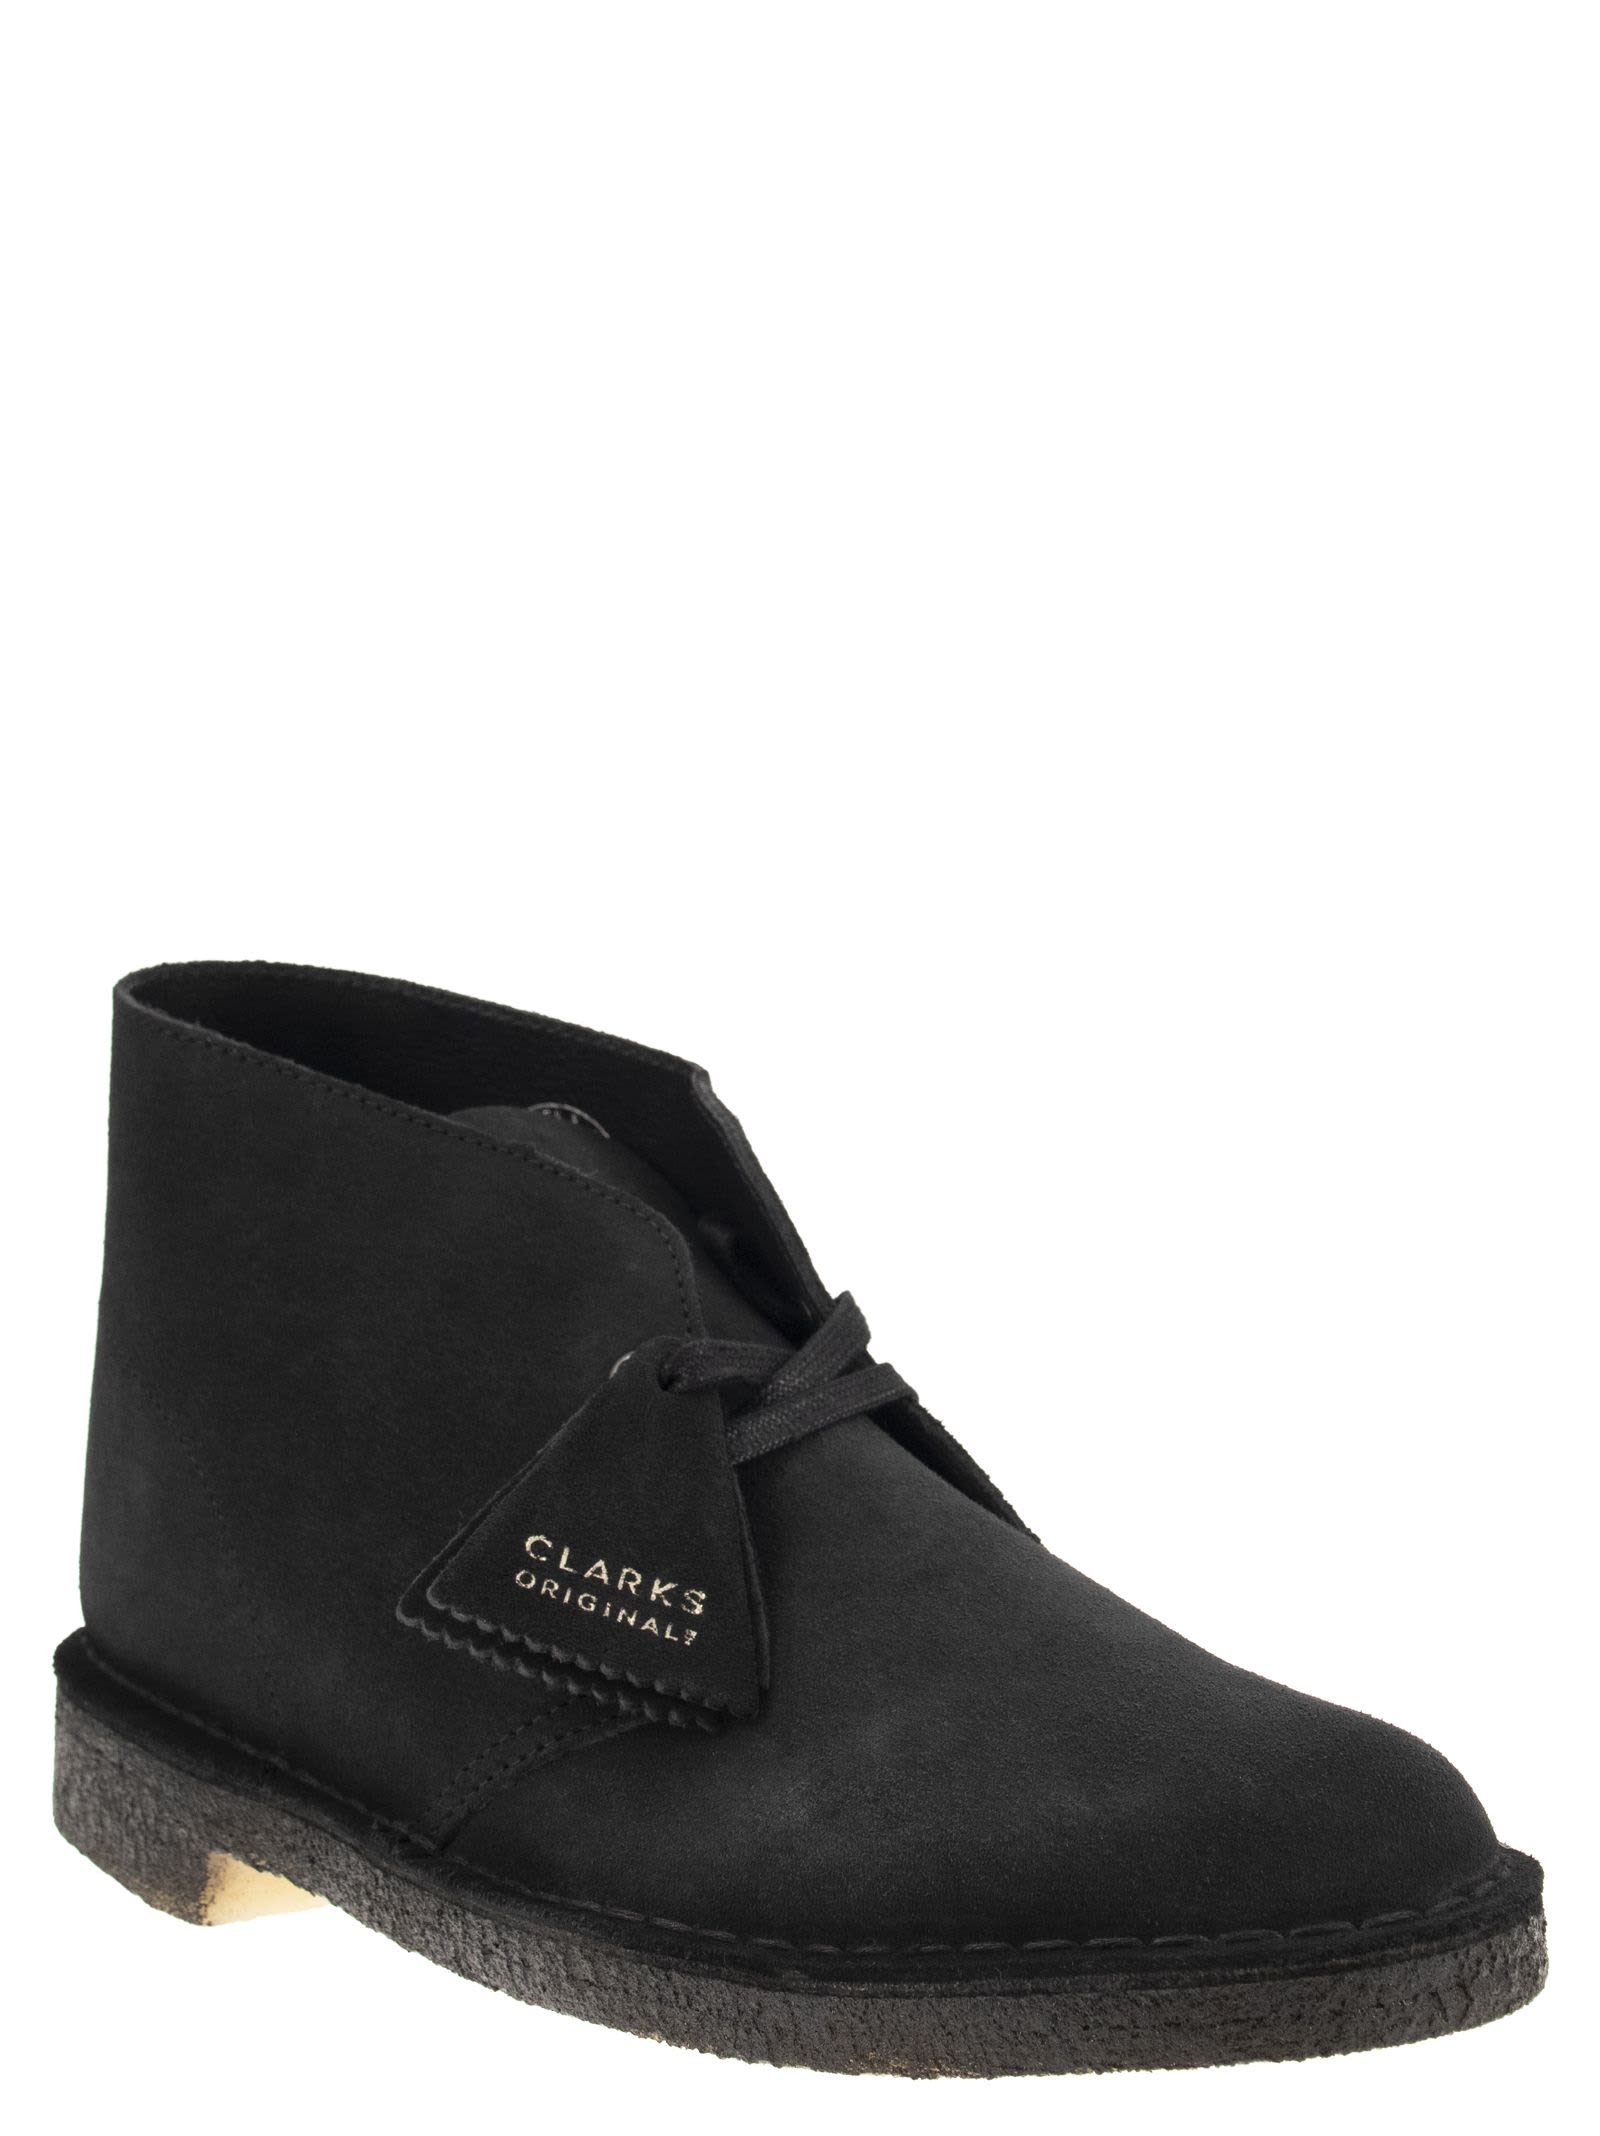 Shop Clarks Desert Boot - Lace-up Boot In Navy